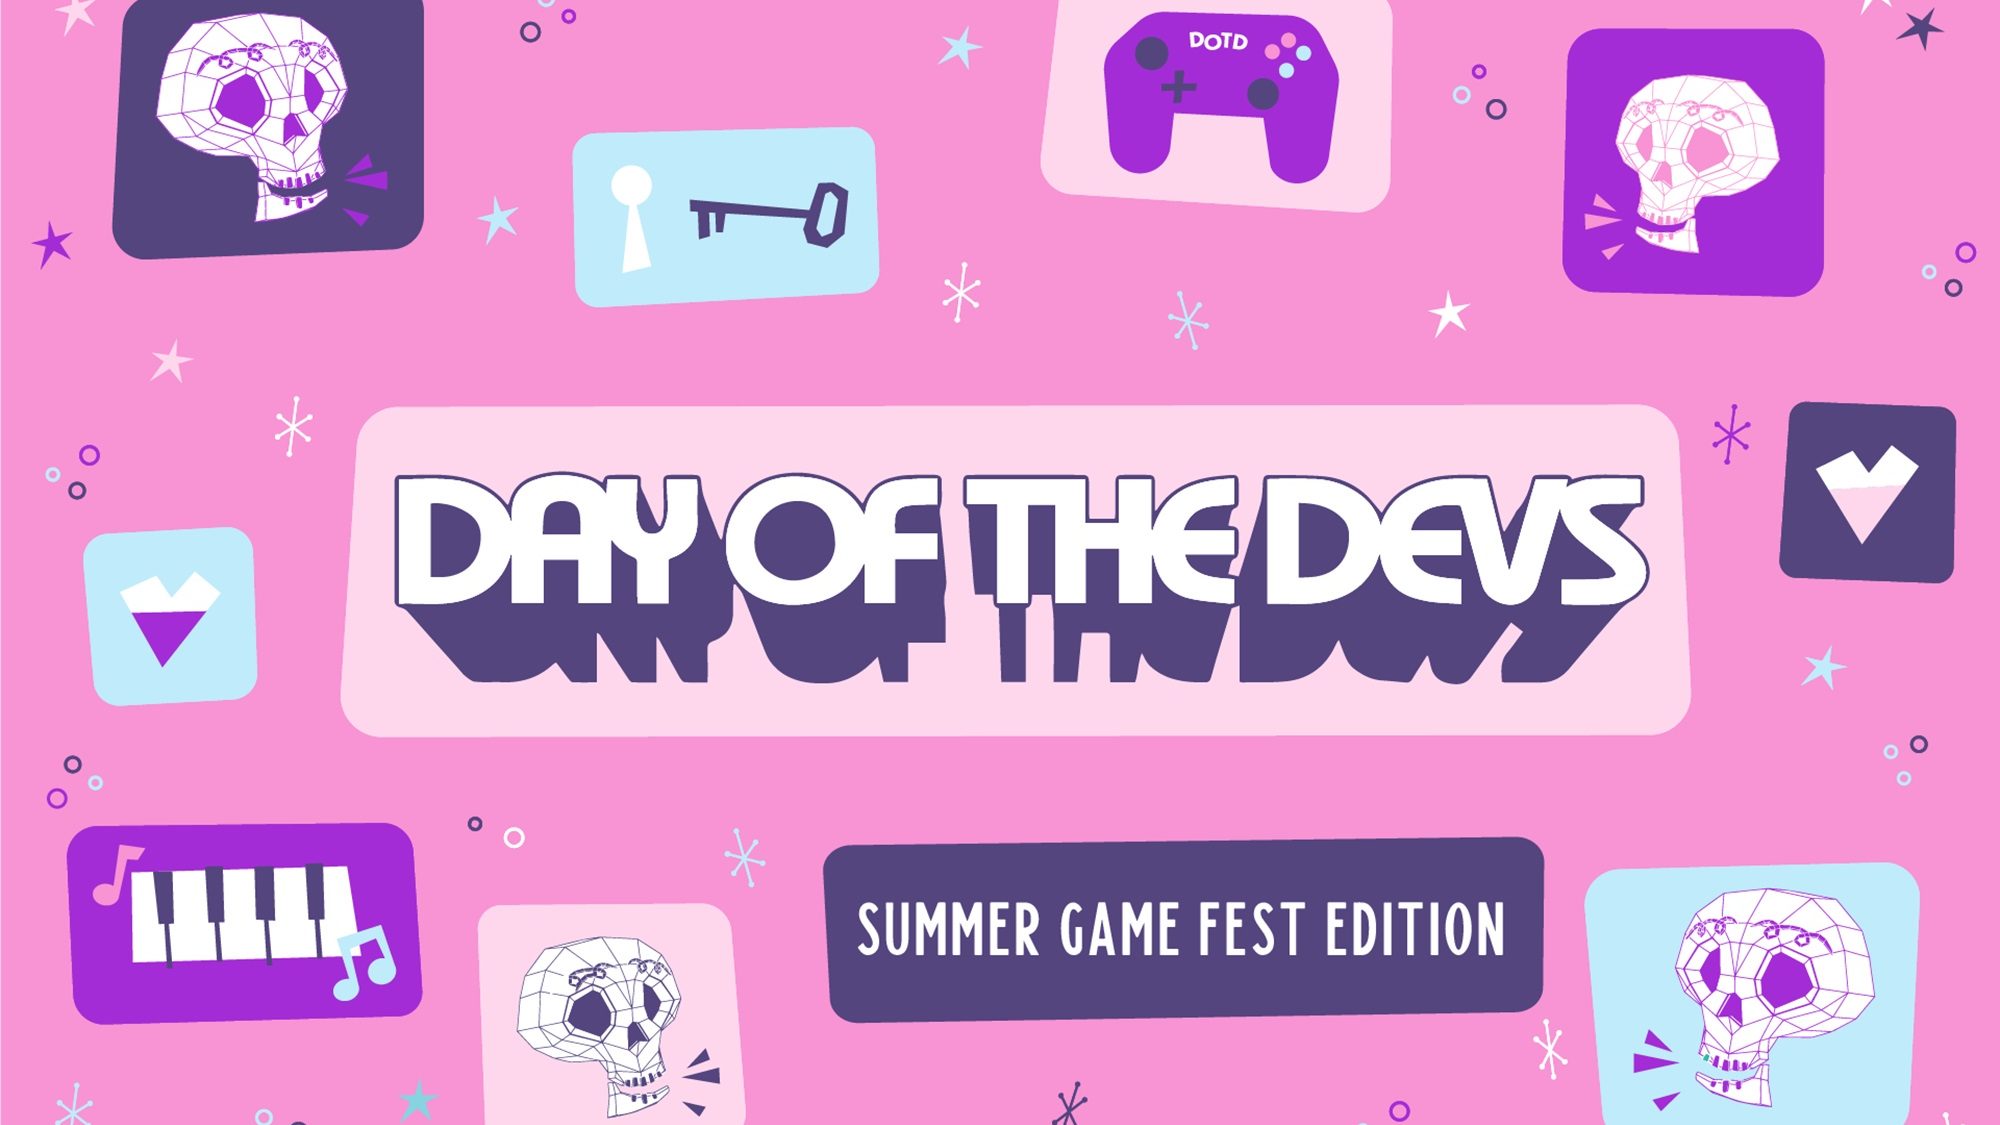 Key art for Day of the Devs shows skulls and controllers.